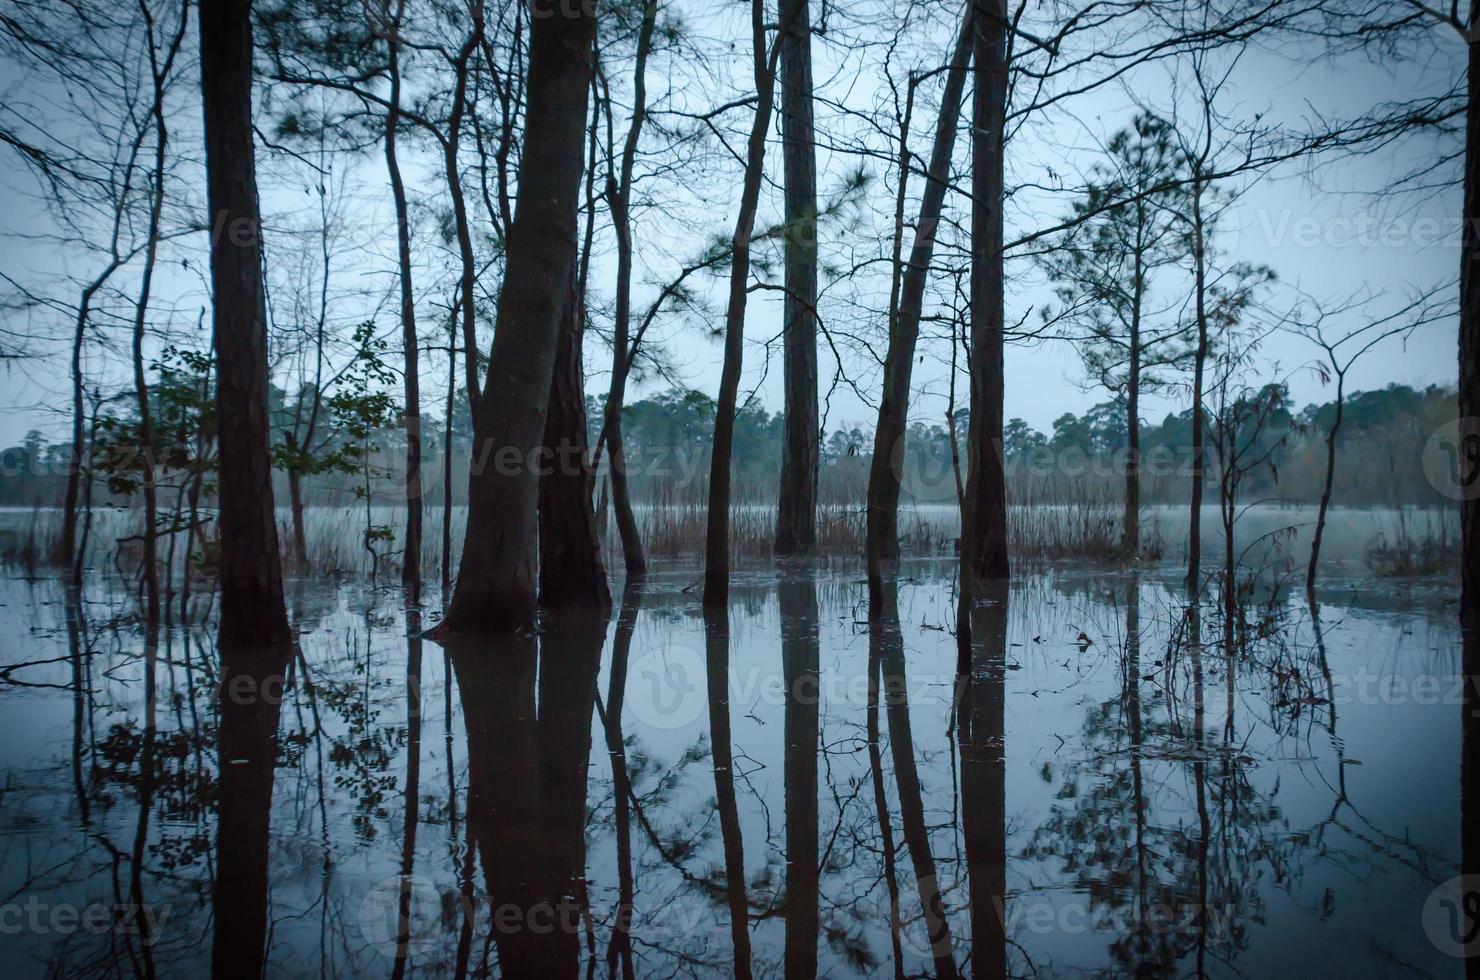 Heavy rains have submerged the trees that stand on the edge of the pond, their shapes reflected upon the water-soaked ground on this early winter morning before sunrise. photo